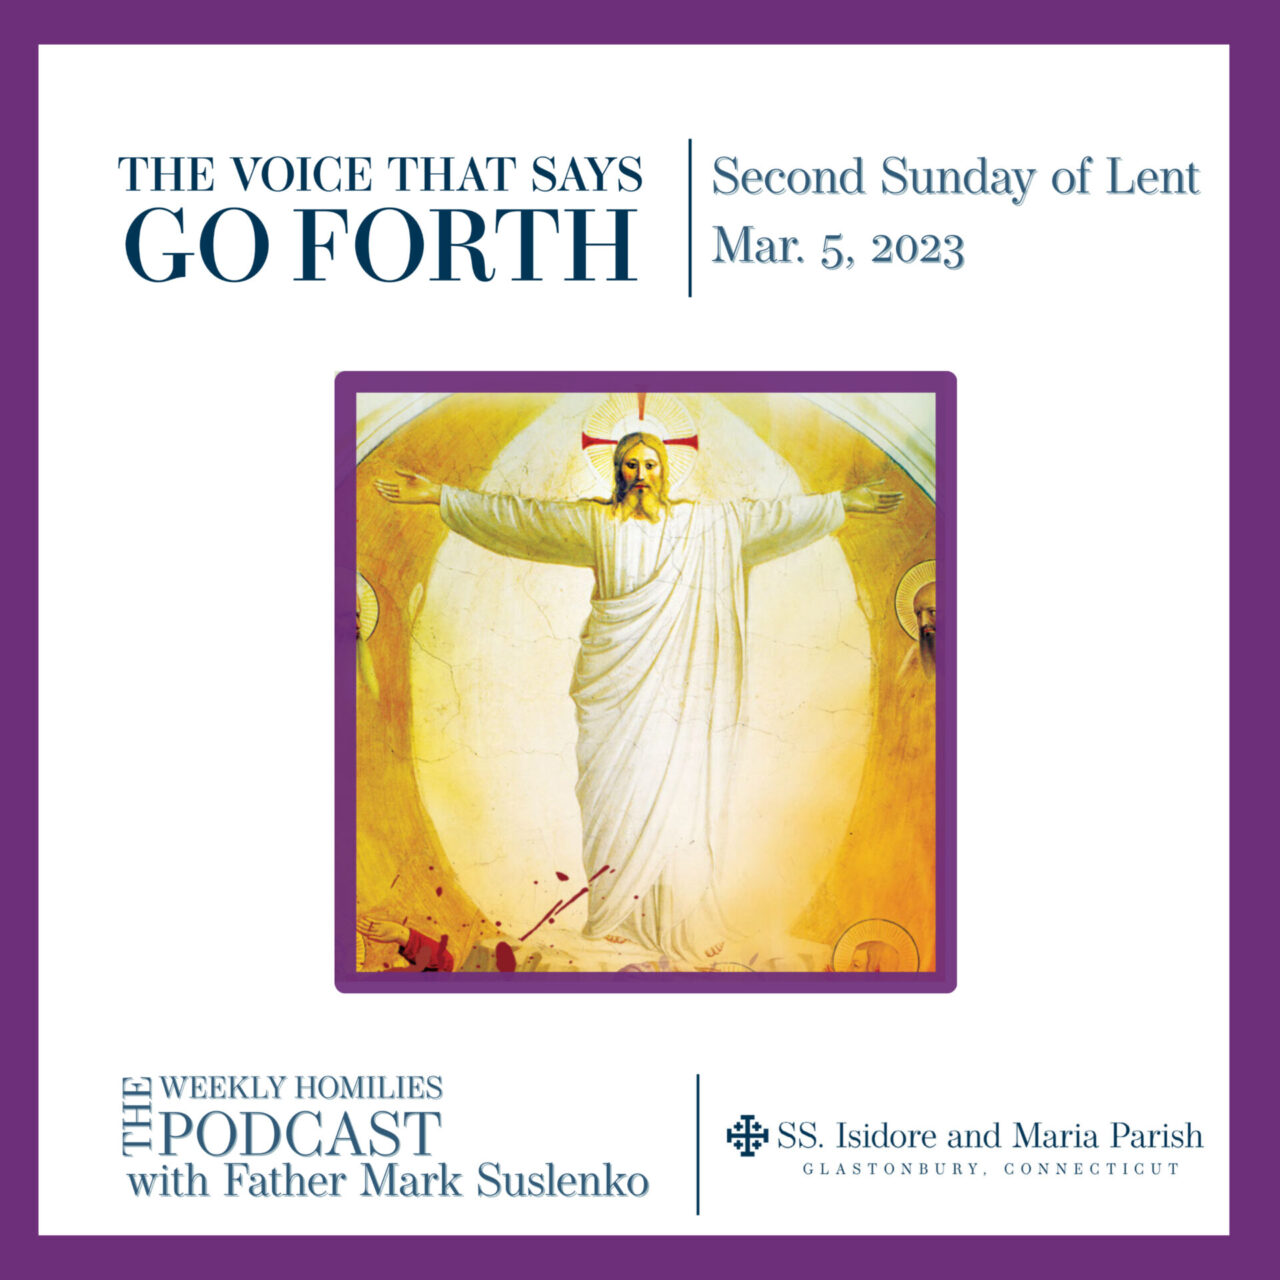 PODCAST: The Voice That Says “Go Forth”